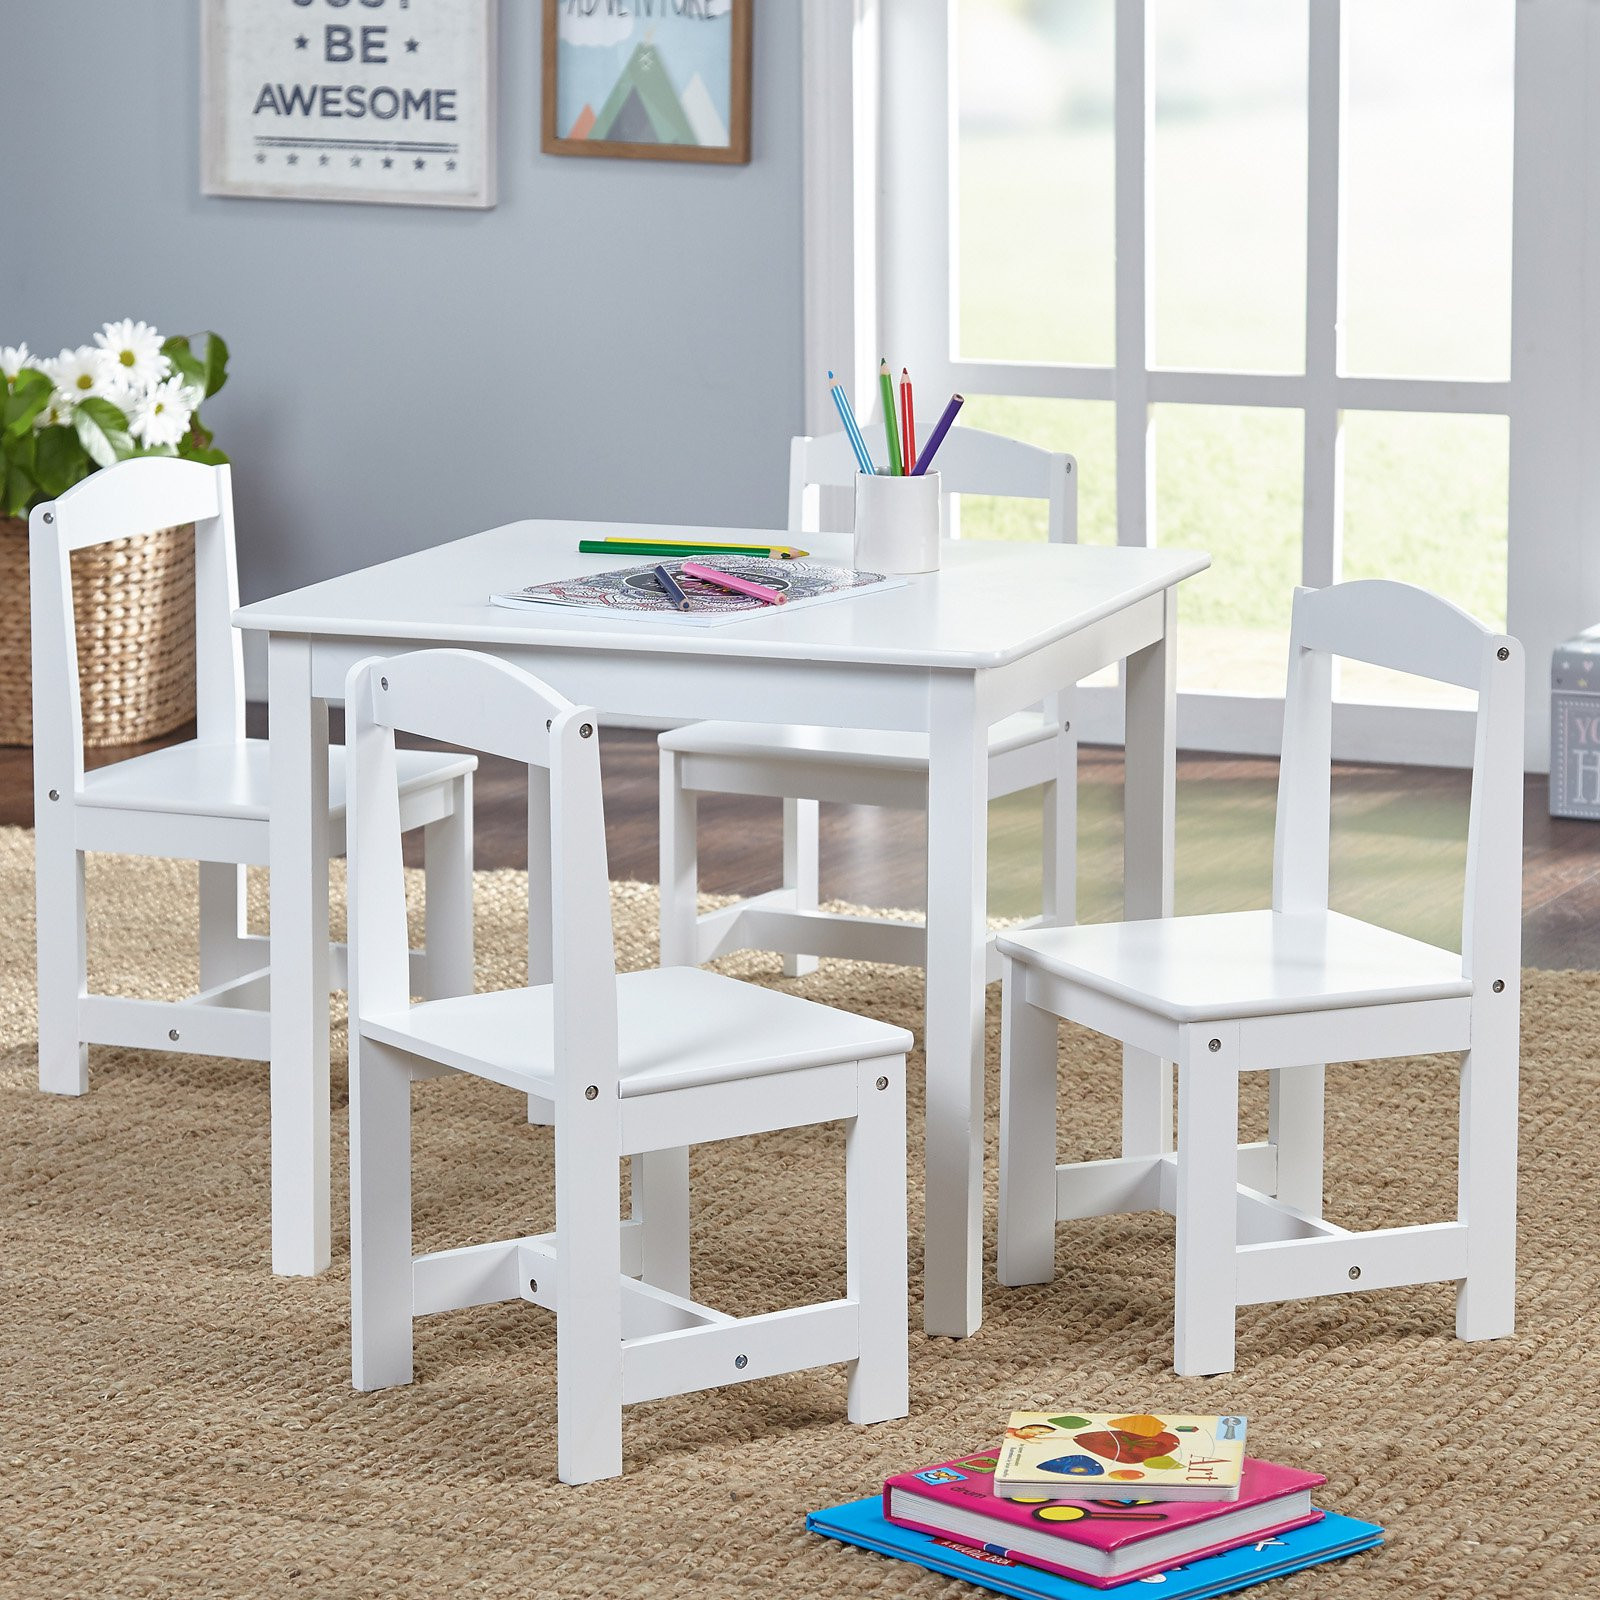 Kids Table And Chairs Target
 Tar Marketing Systems Hayden 5 Piece Kids Table and